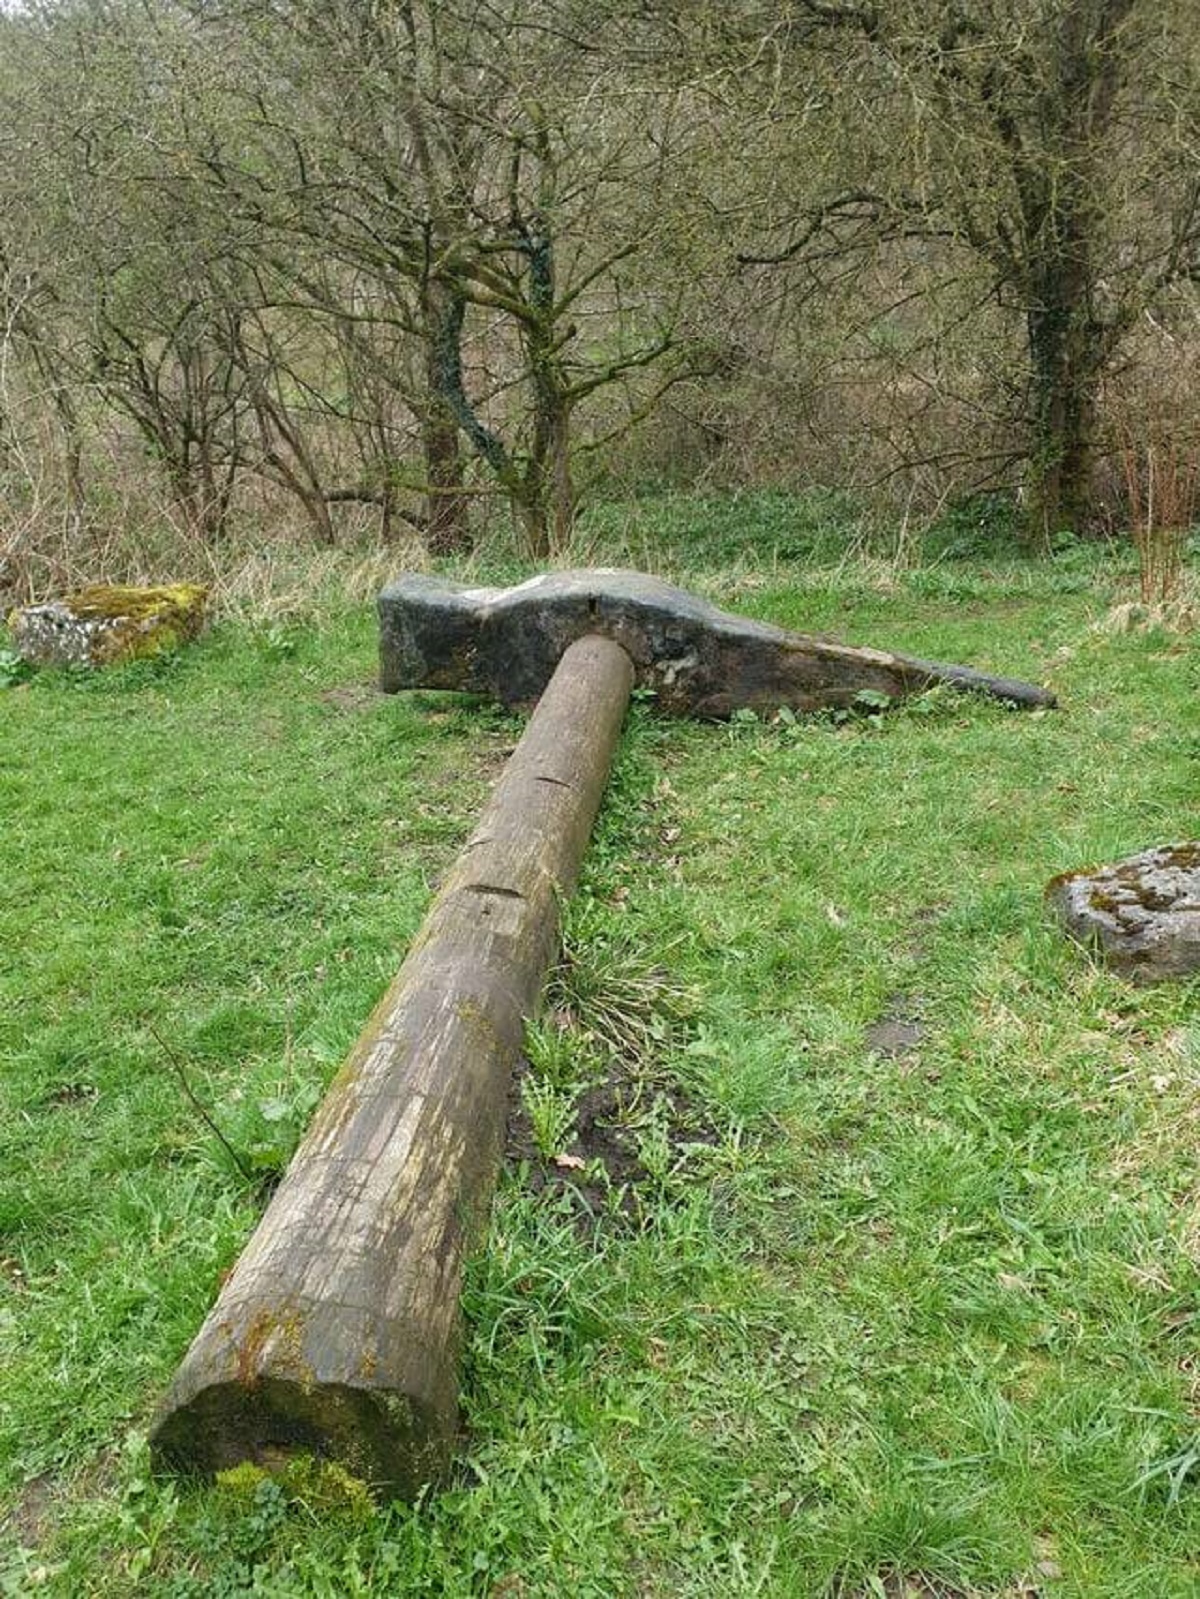 "Human sized hammer just chilling in the woods"